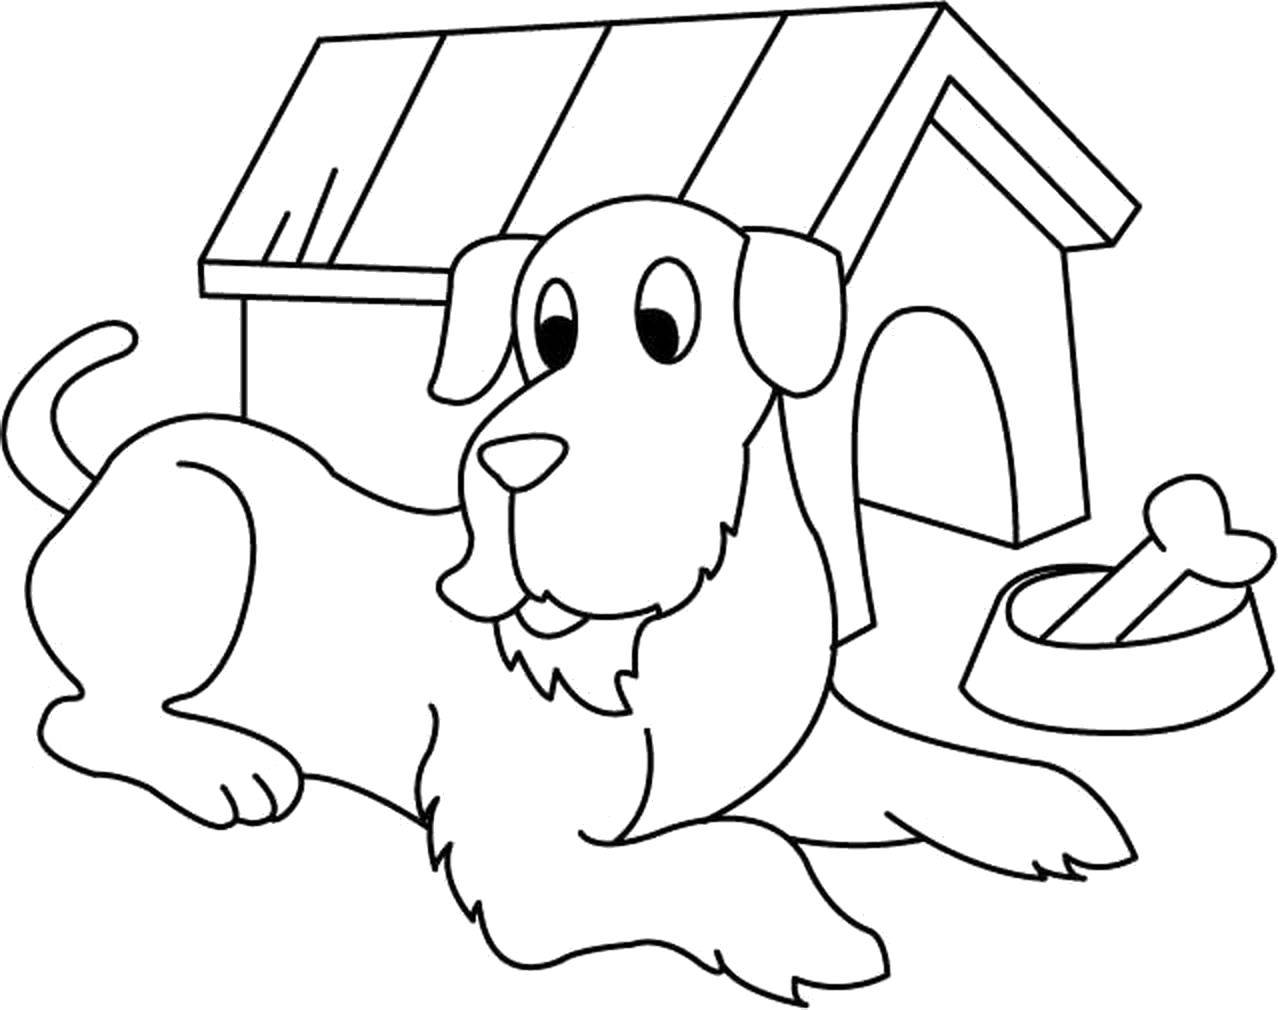 Coloring Dog with a box. Category Animals. Tags:  dog, kennel.